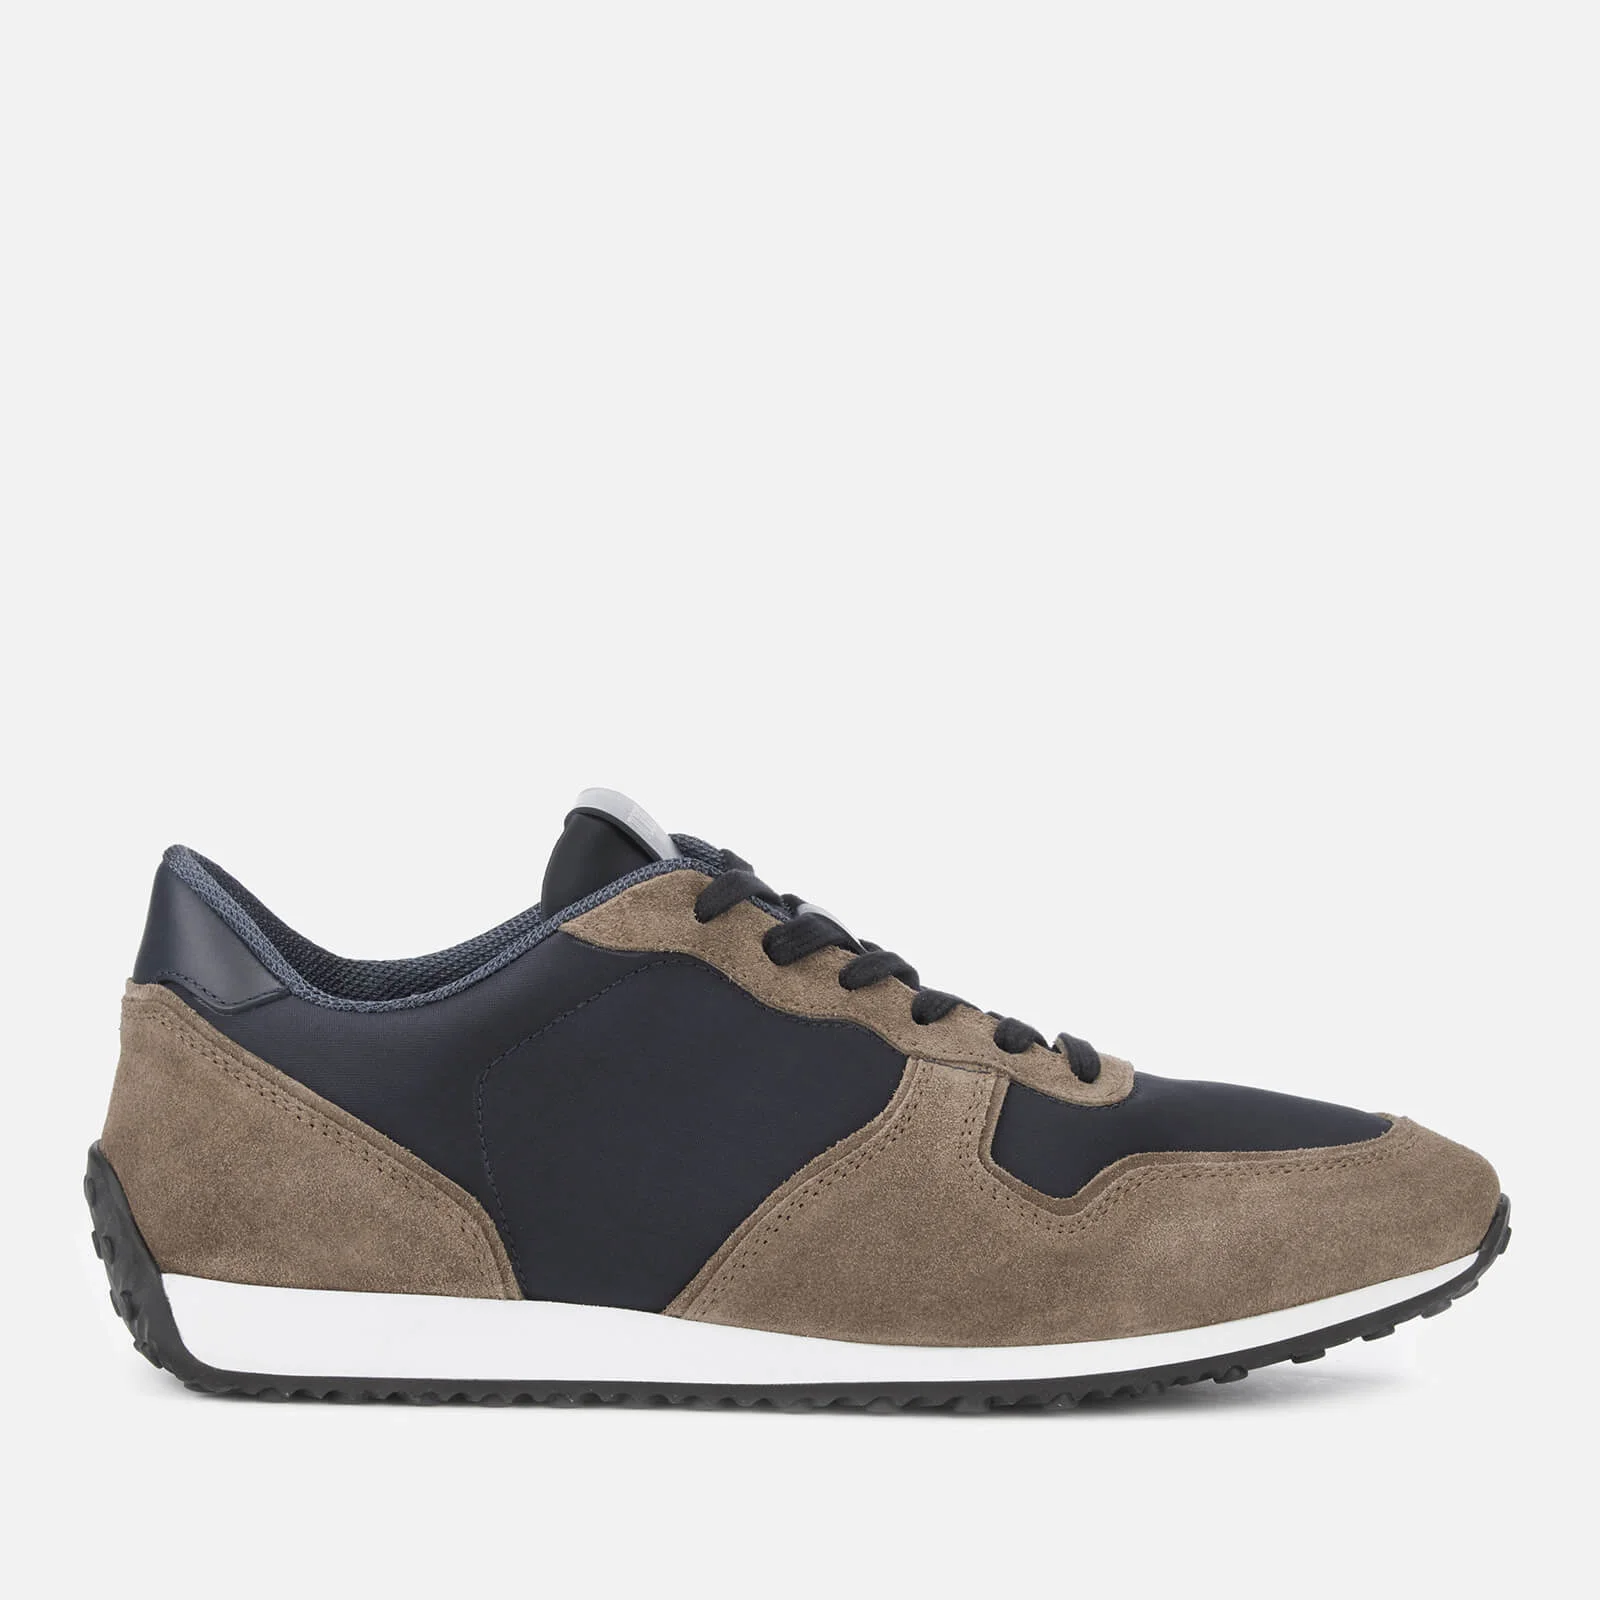 Tod's Men's Casual Low Top Trainers - Brown/Black Image 1